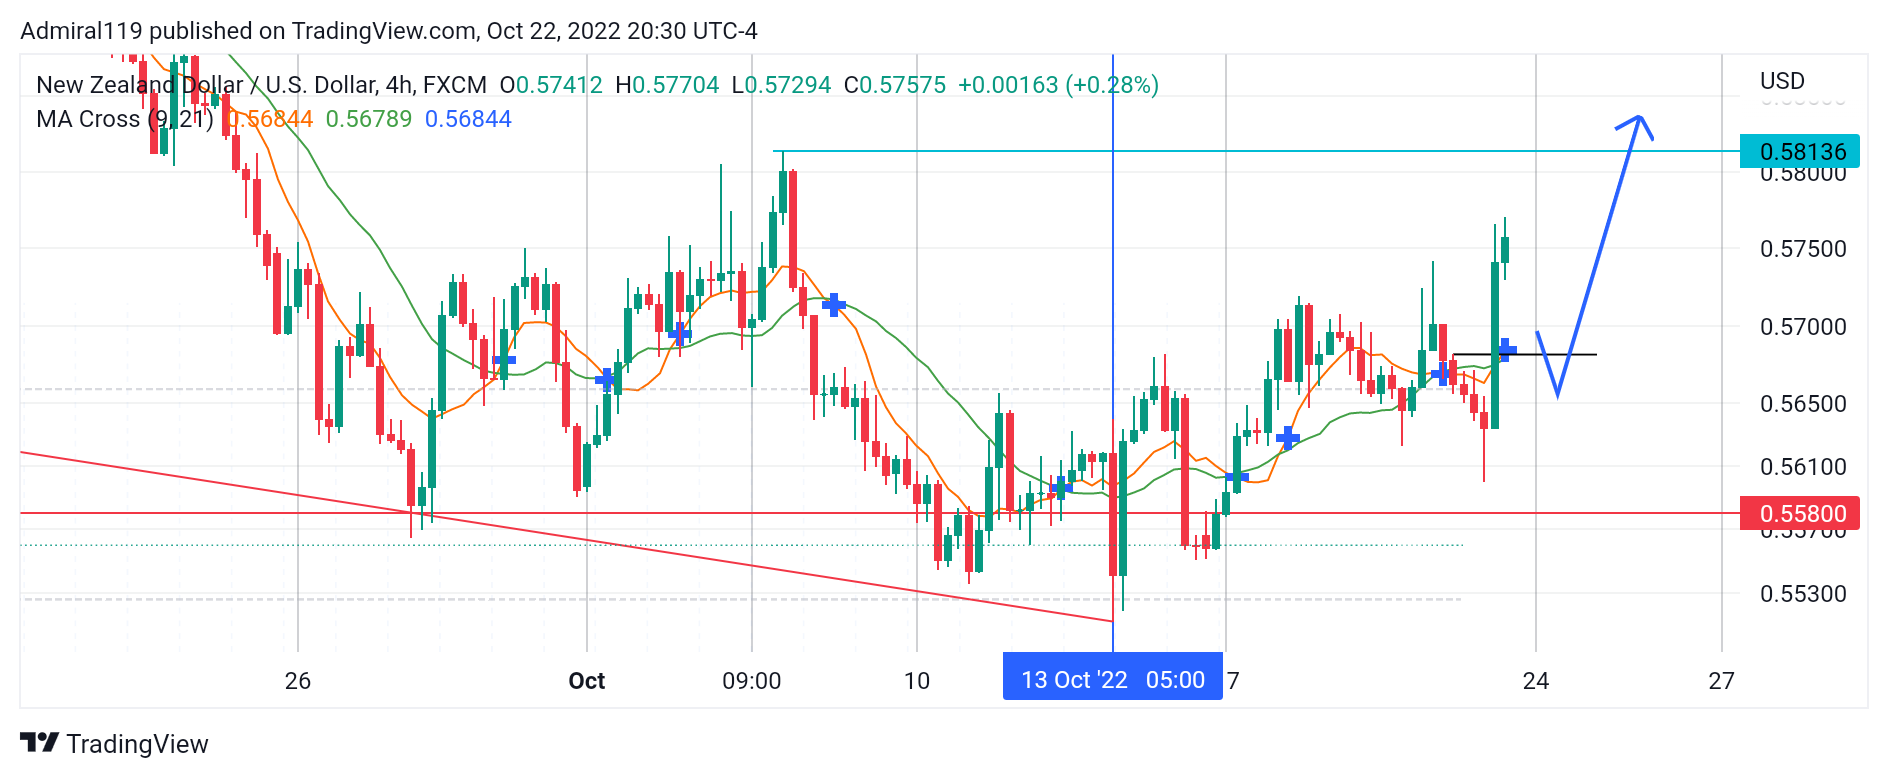 NZDUSD Changes Direction as the Market Hits the Demand Zone